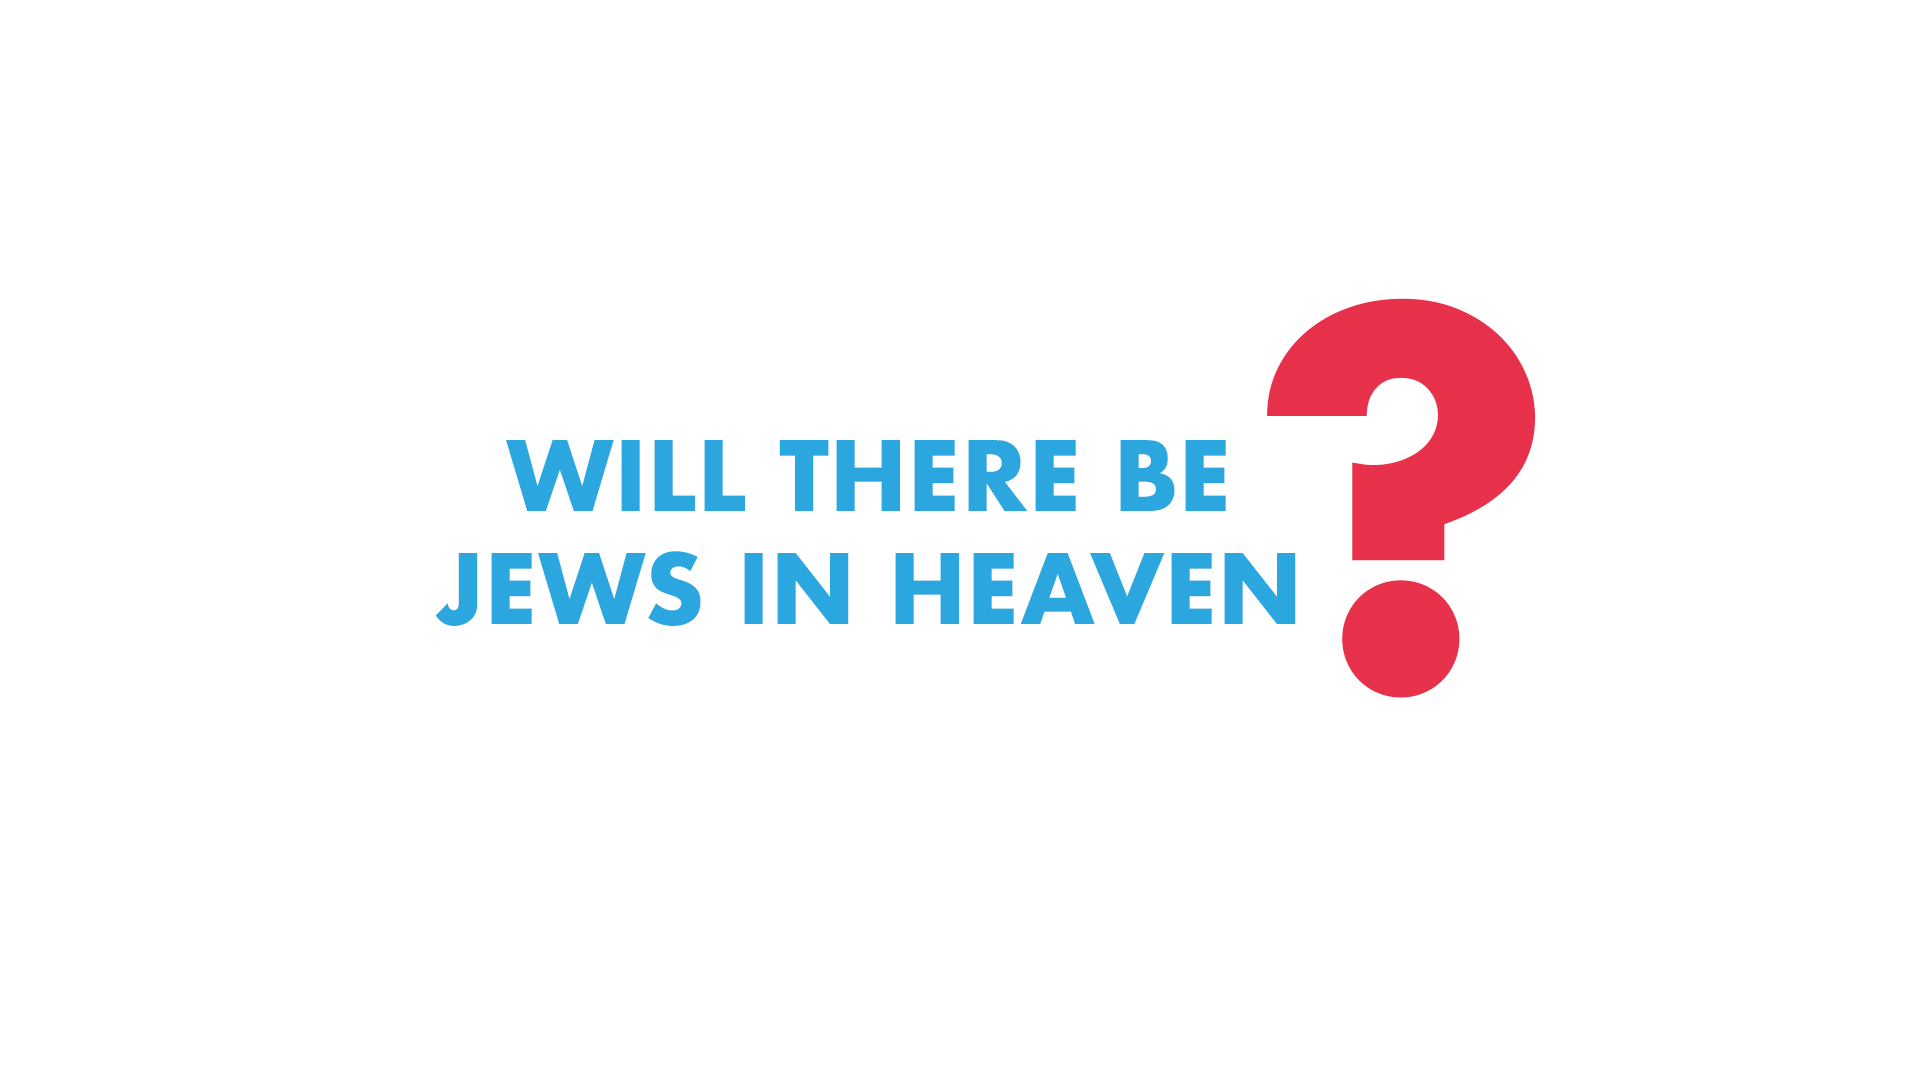 Will there be Jews in Heaven?